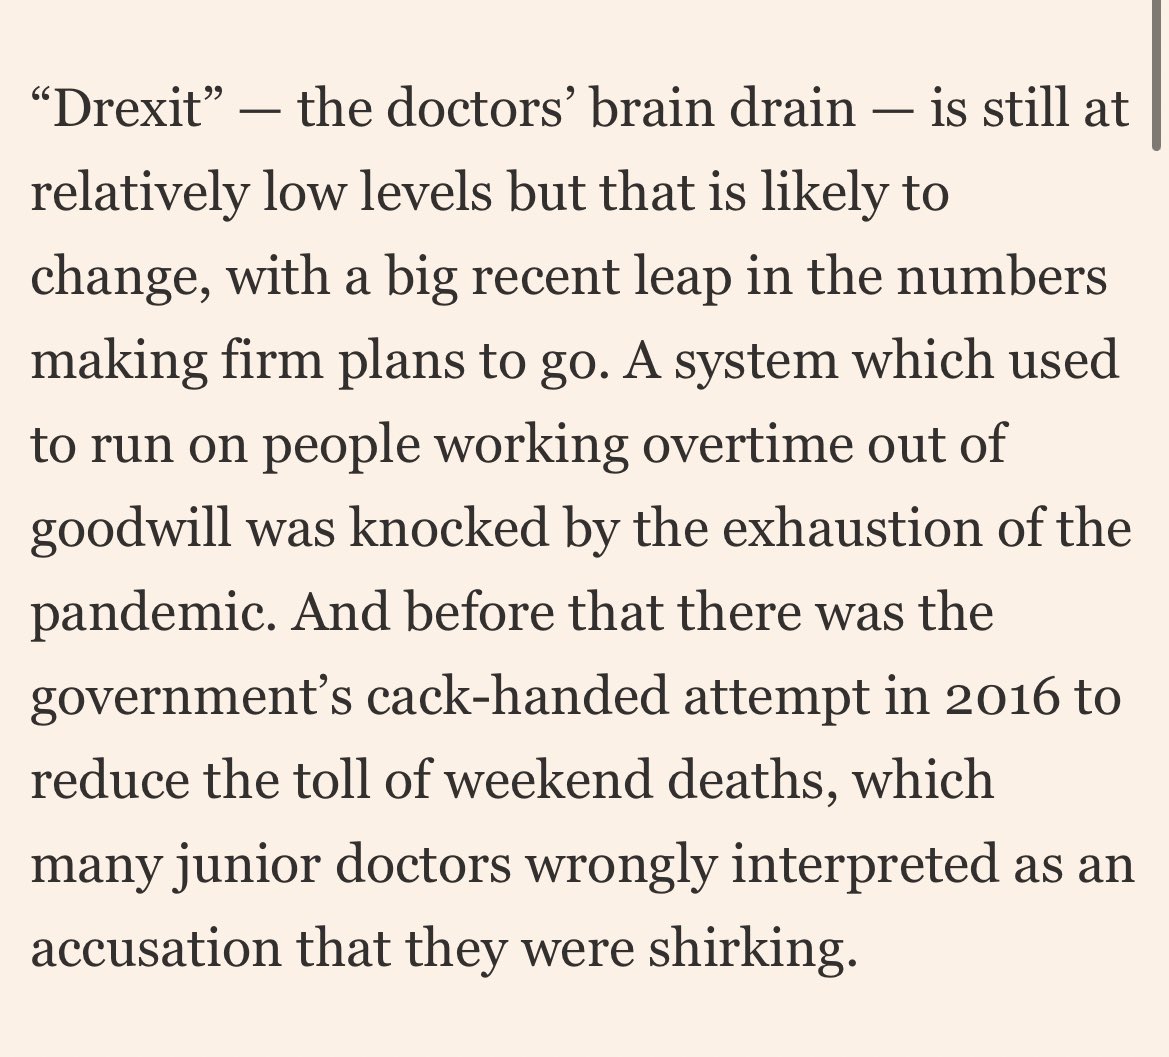 All true - the NHS is haemorrhaging doctors and it could be reversed - but please can we come up with a better epithet than DREXIT?!